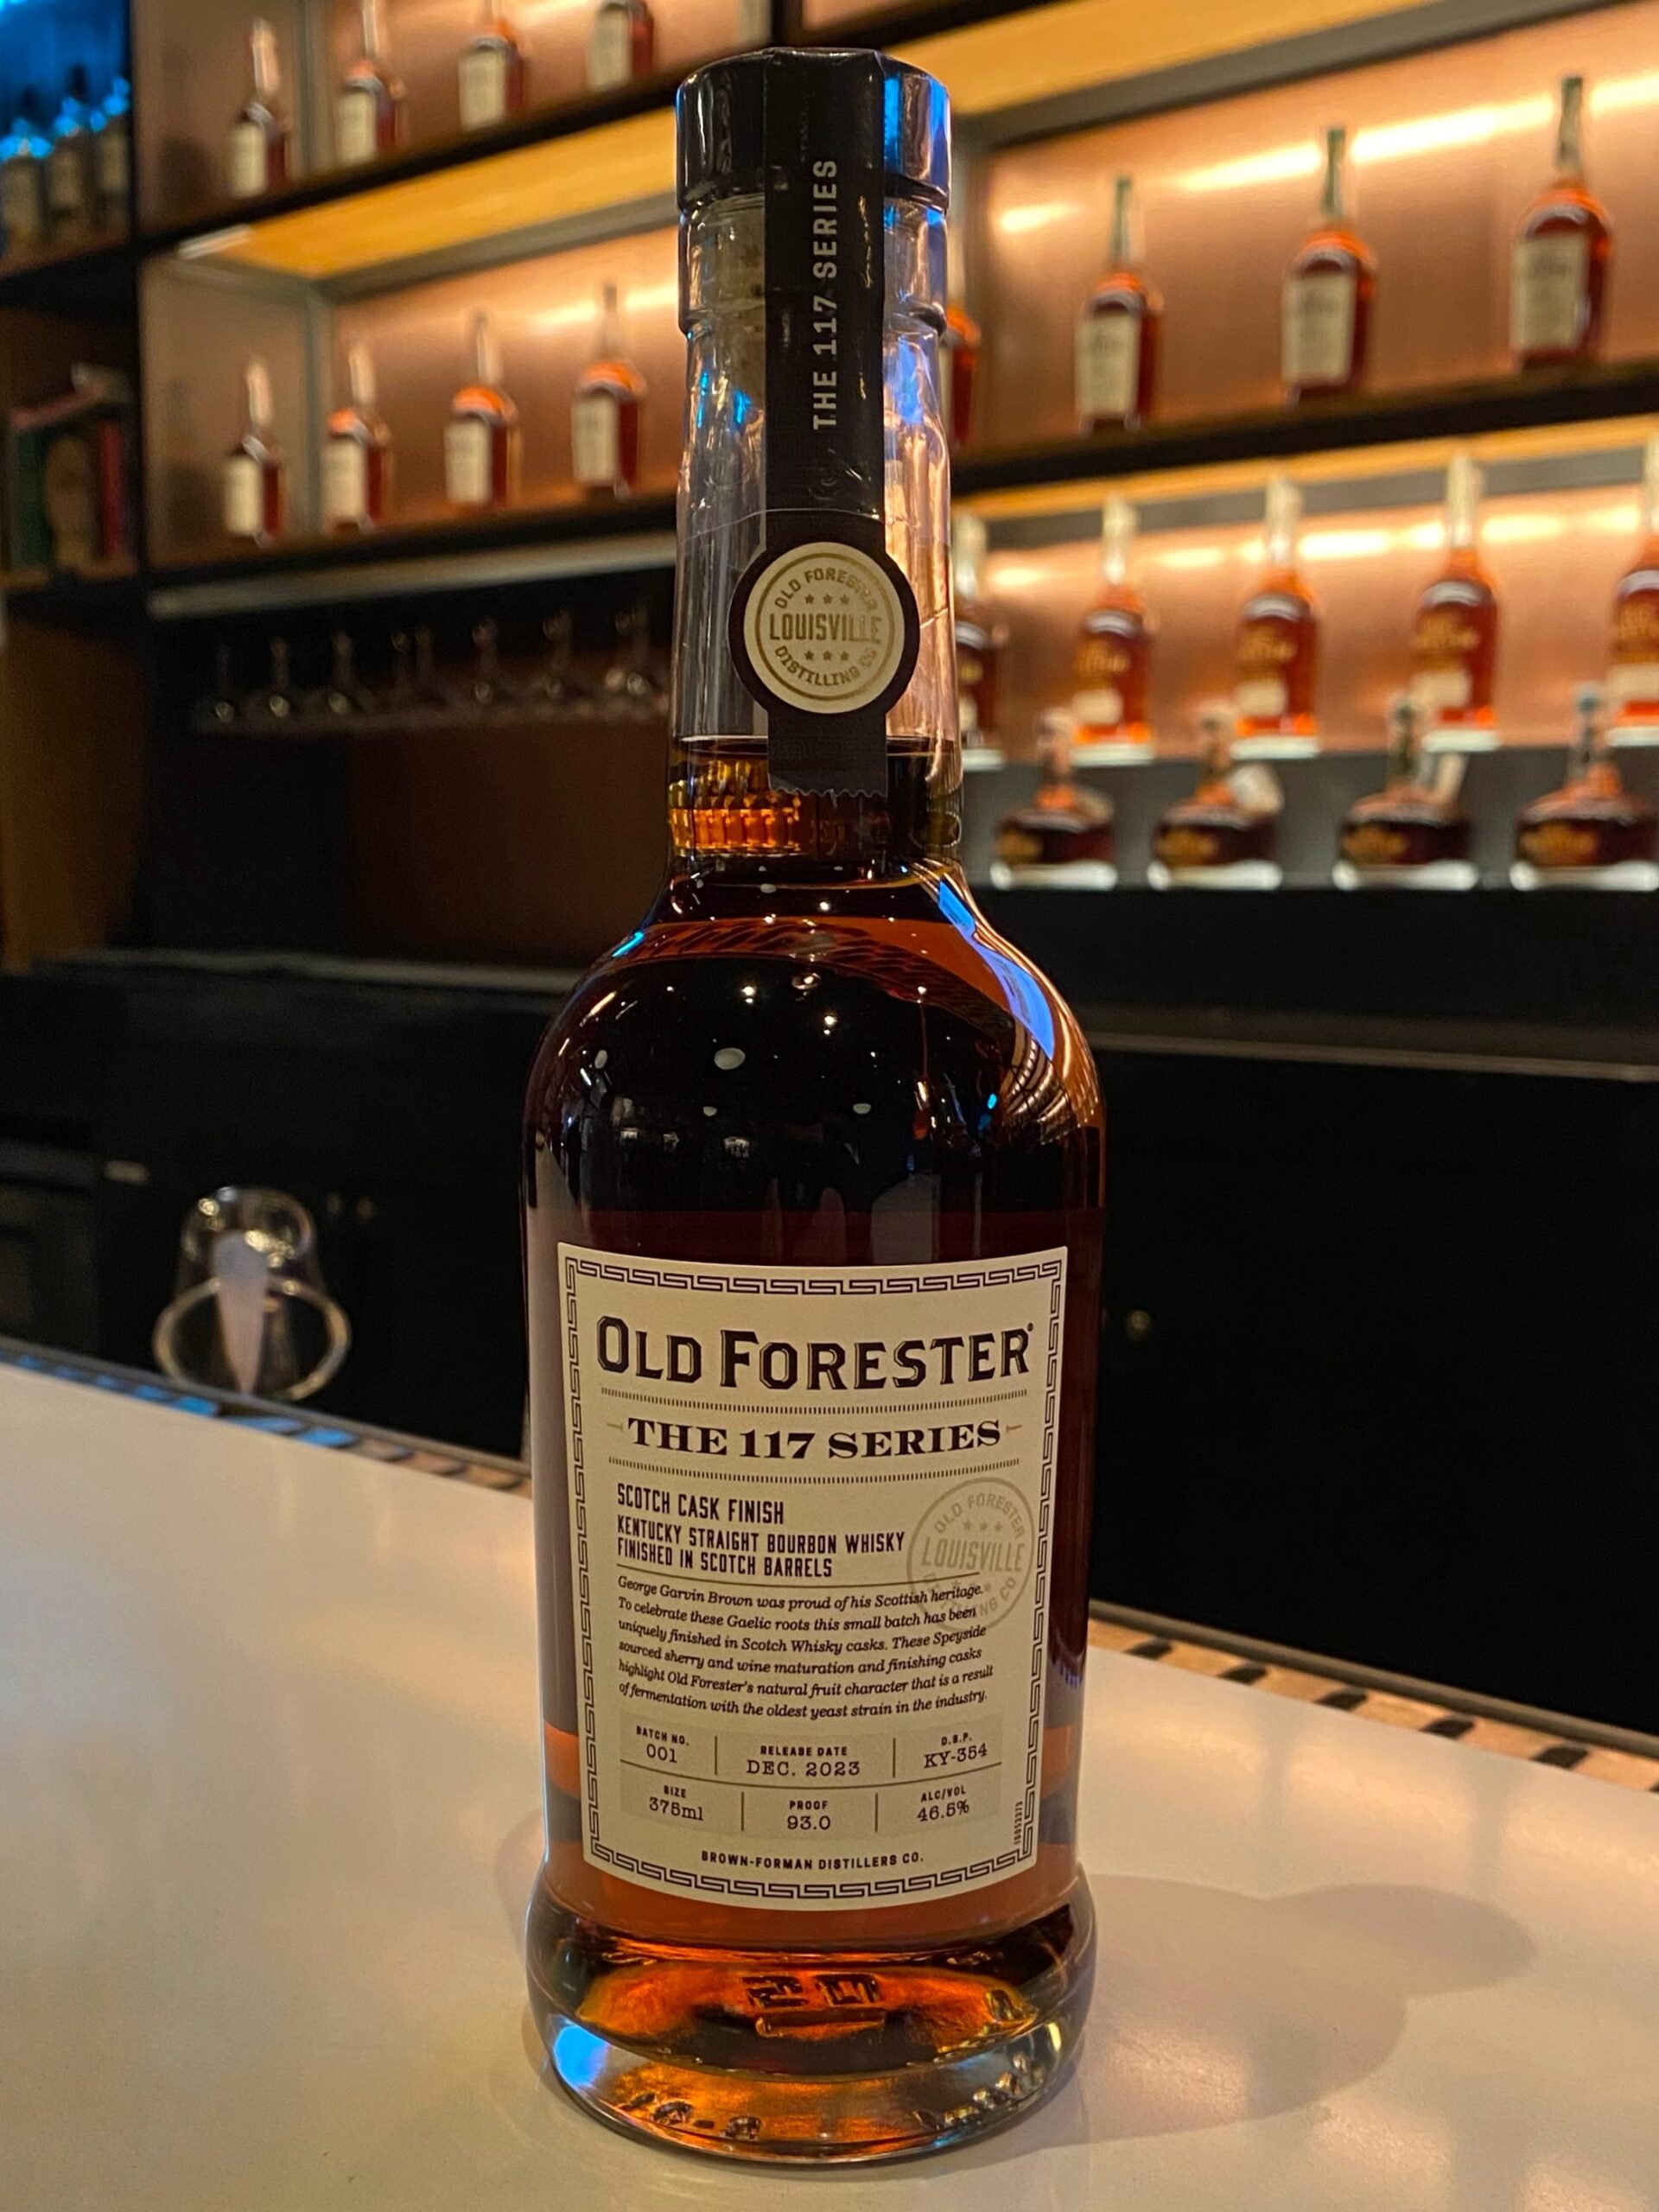 Old Forester Drops New 117 Series Scotch Cask Finish (and We Tasted It)